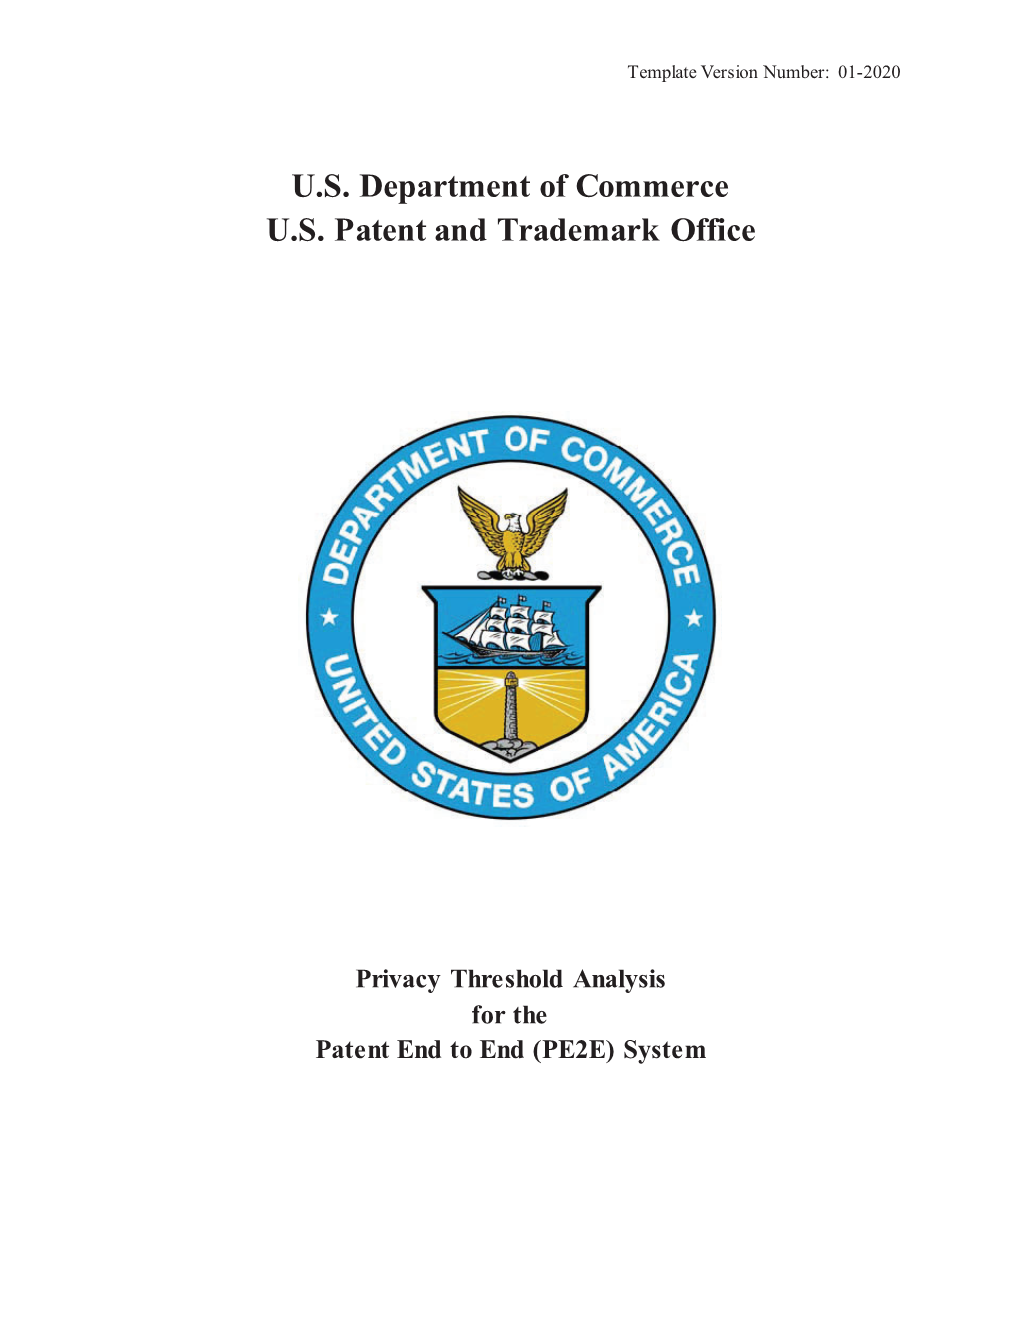 U.S. Department of Commerce U.S. Patent and Trademark Office